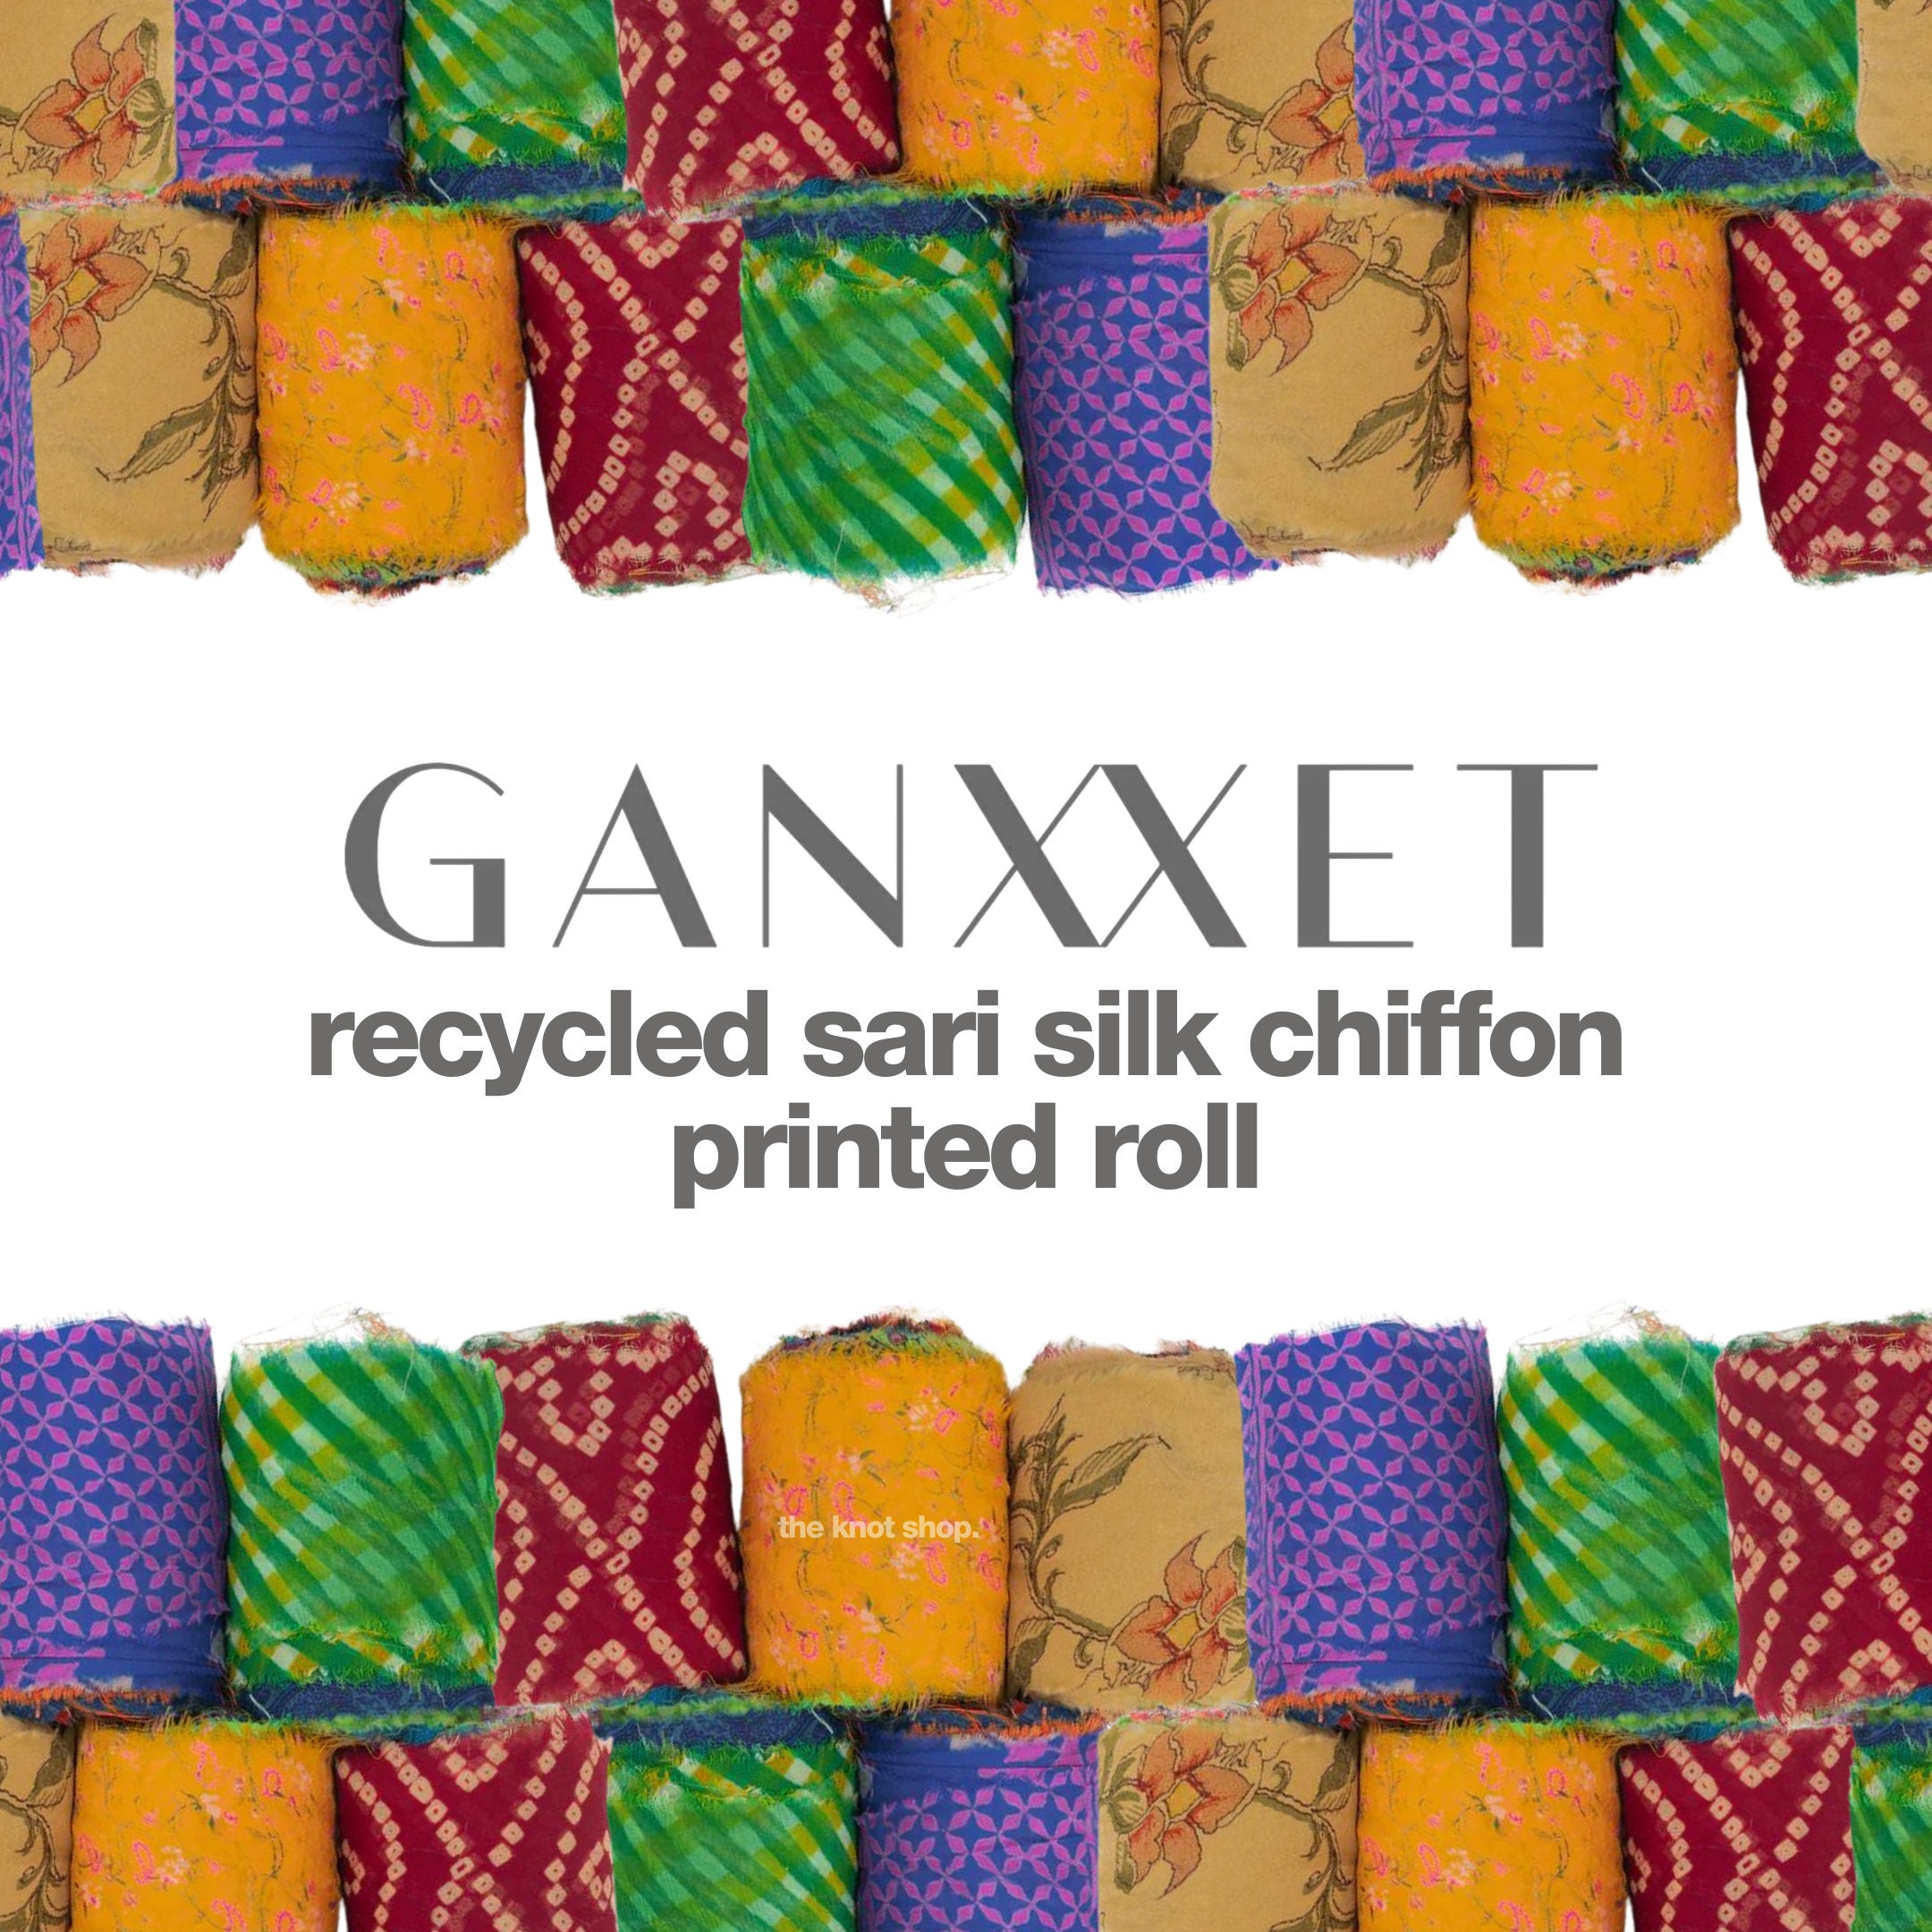 Indian Recycled Silk Sari, an Ideal Choice for Nuno Felting. This